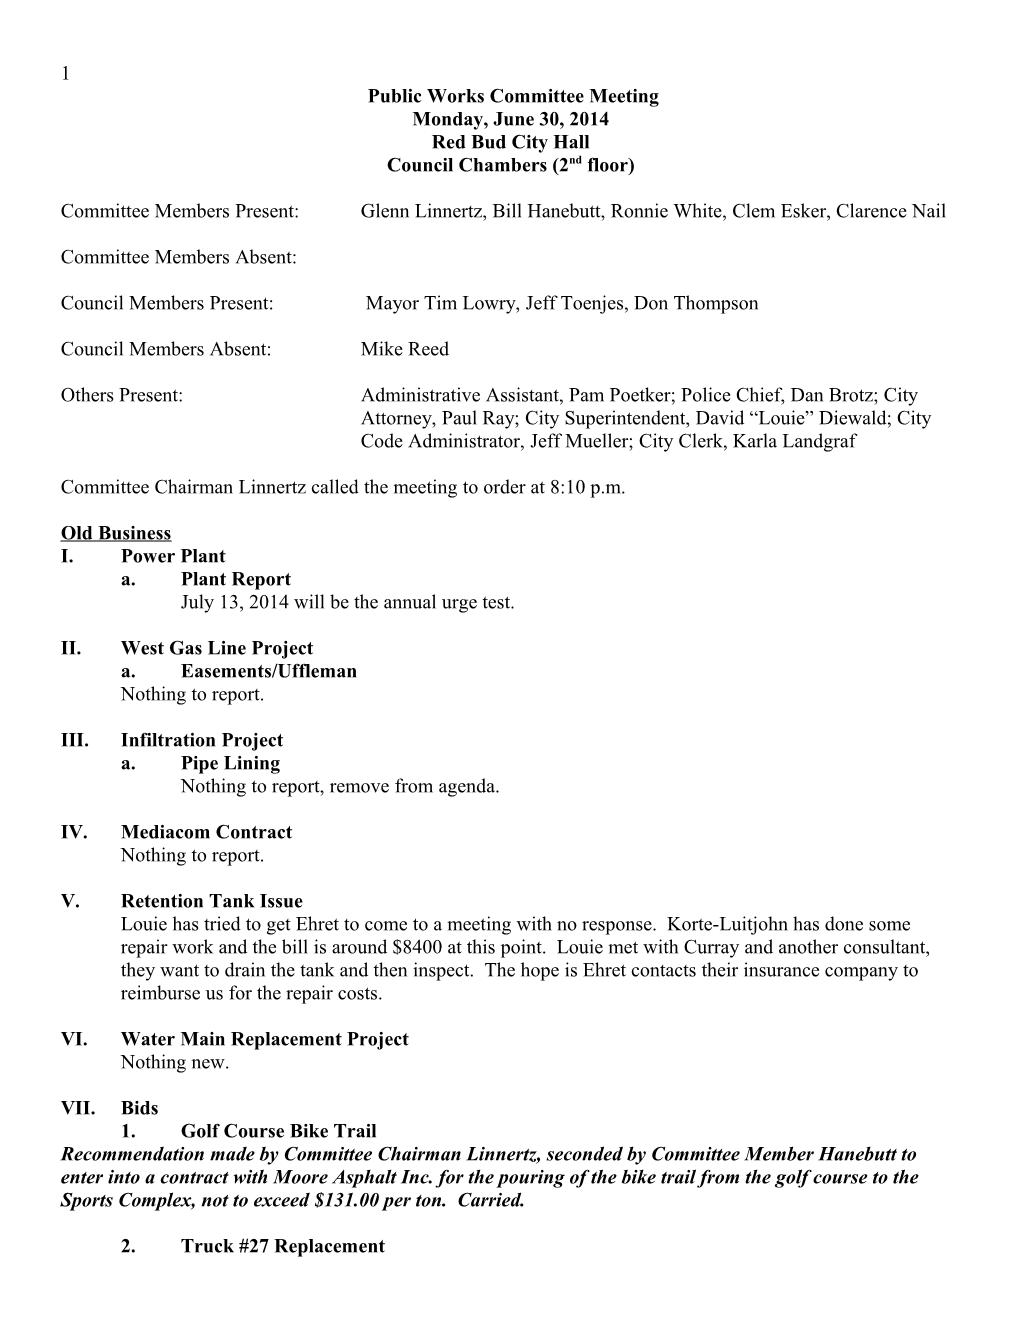 Public Works Committee Meeting Minutes